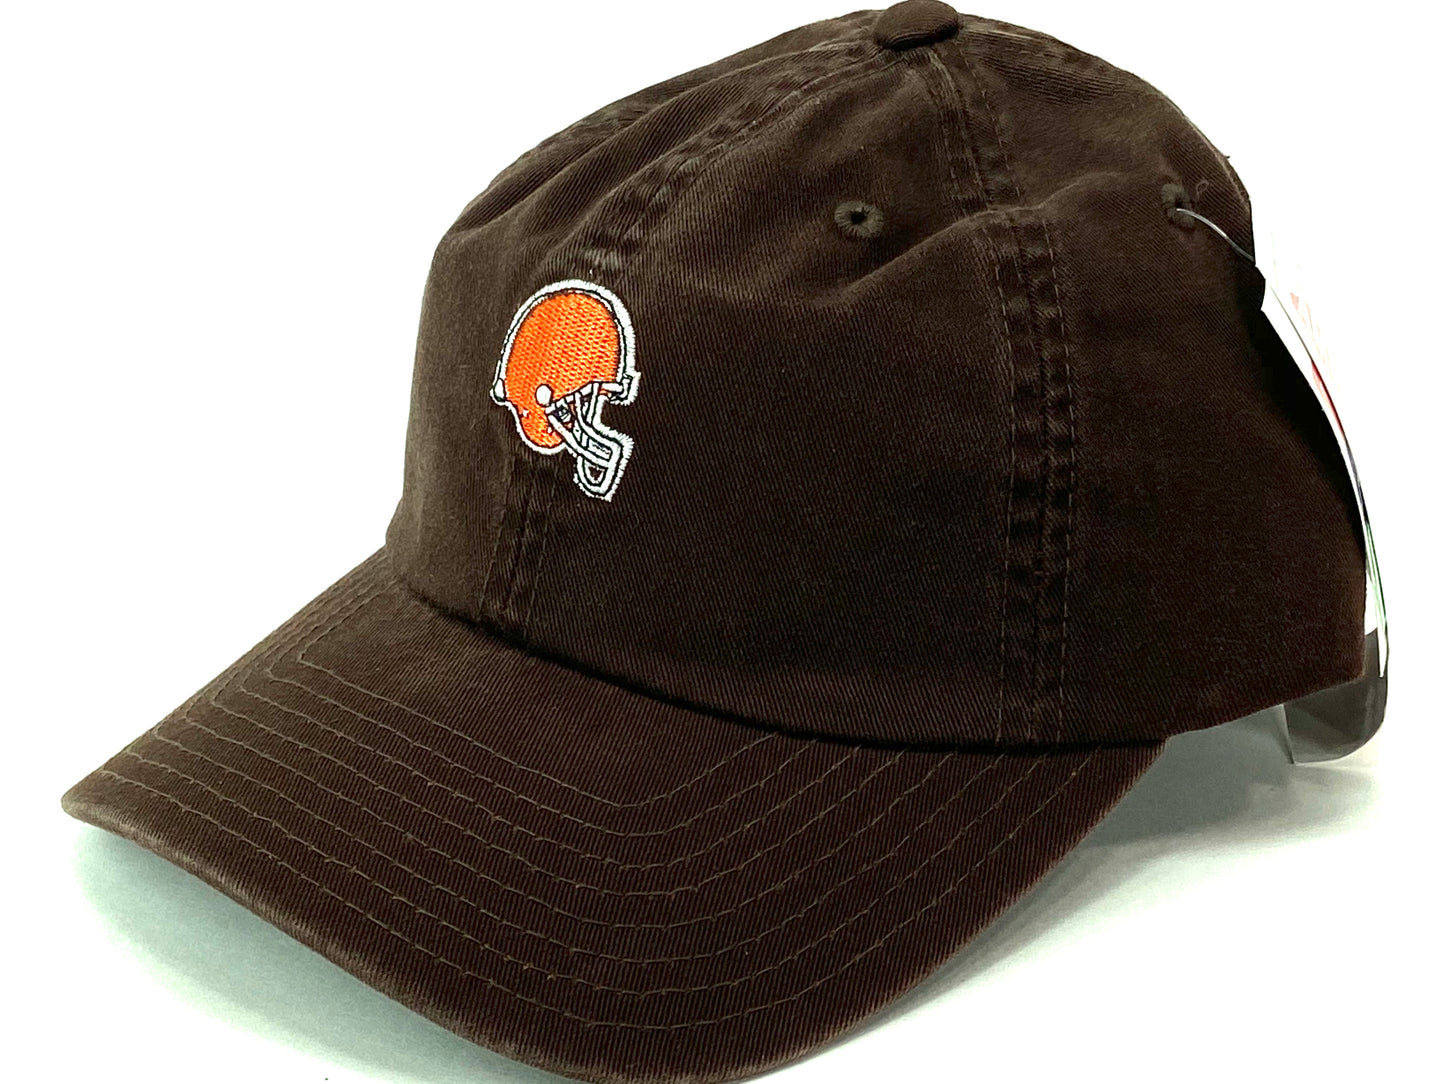 Cleveland Browns Vintage NFL Unstructured Logo Cap by American Needle